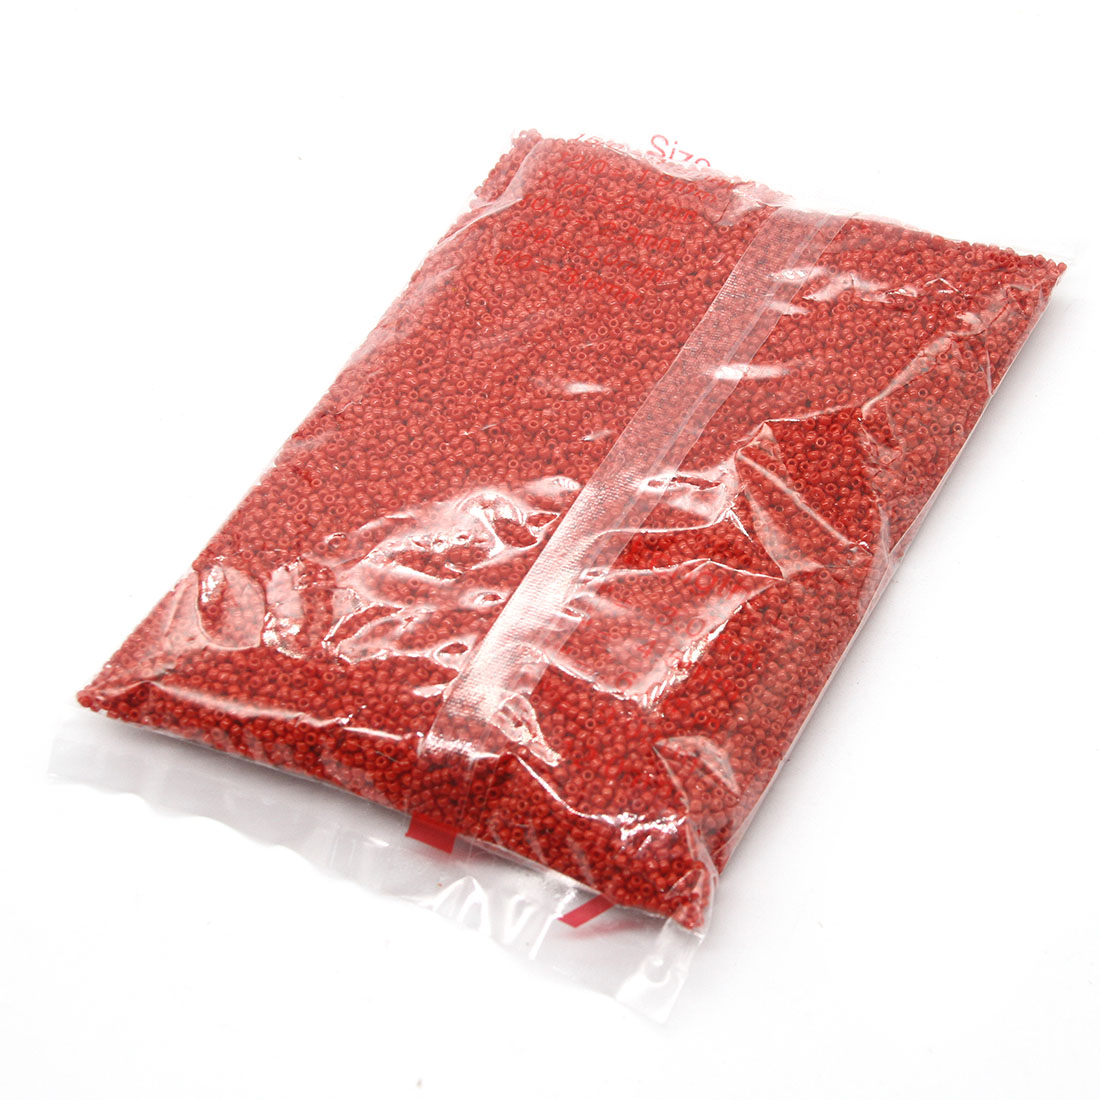 2mm red blood in a pack of 30,000